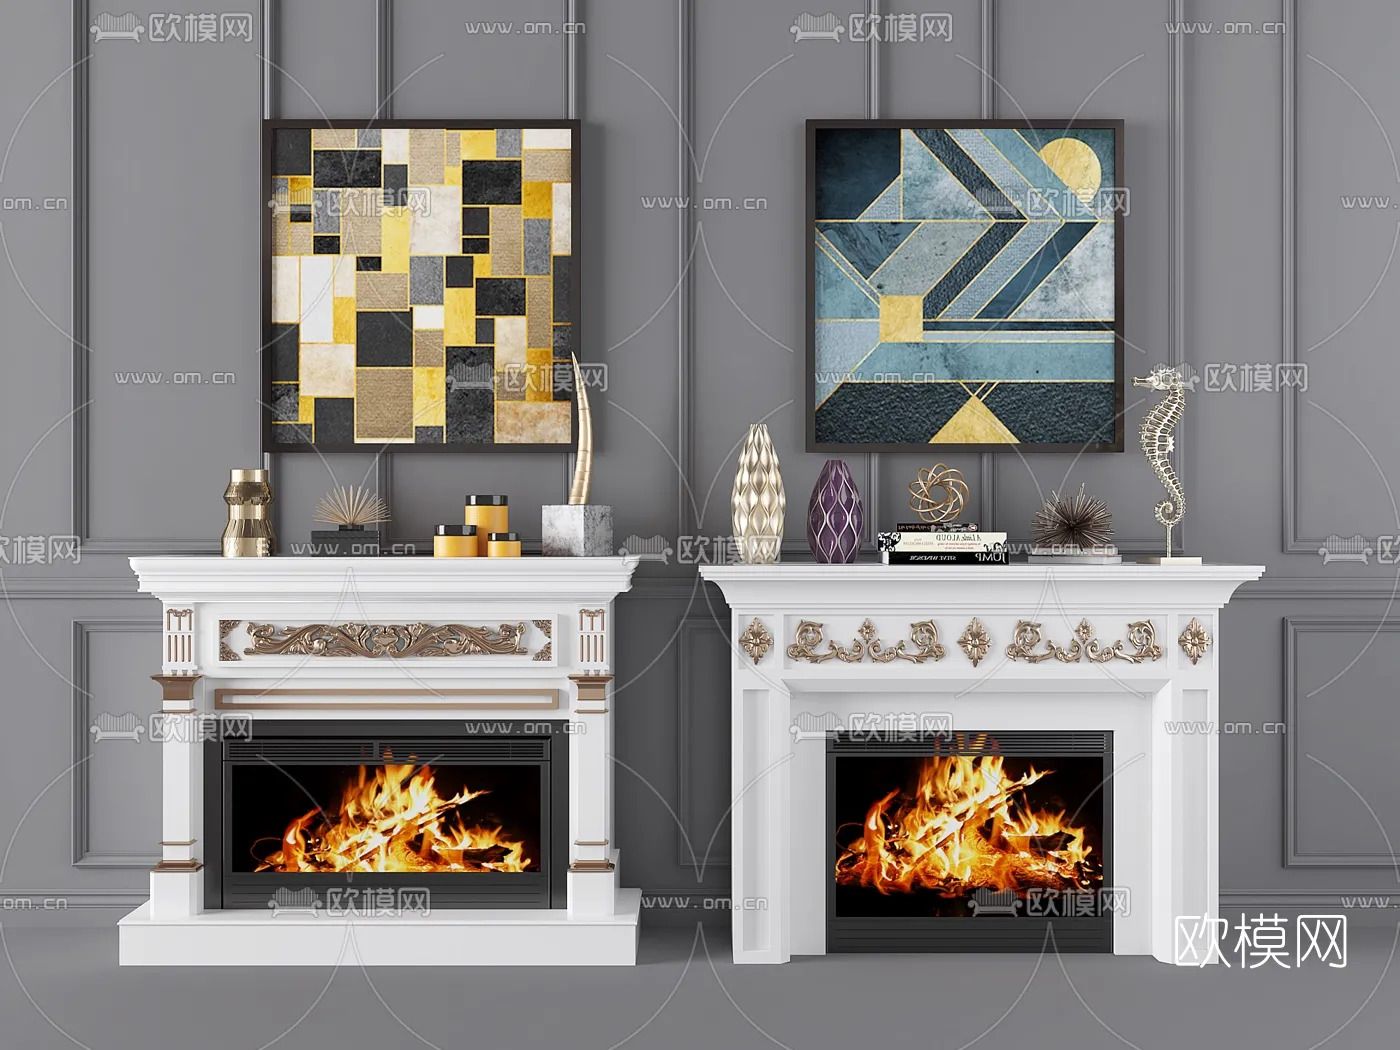 CLASSIC – FIREPLACE 3DMODELS – 043